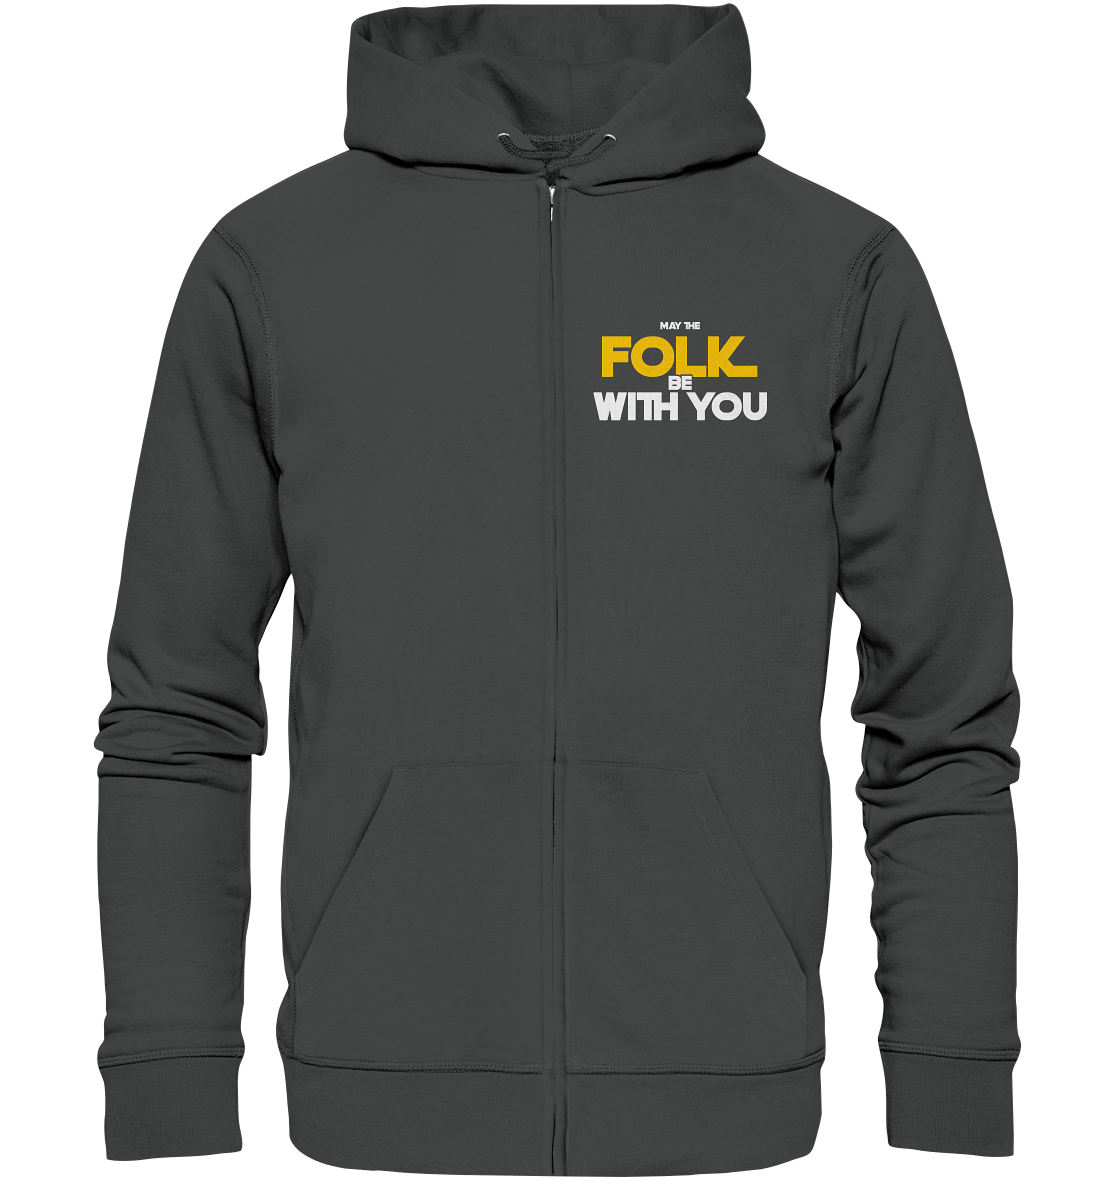 May The Folk Be With You - Organic Zipper